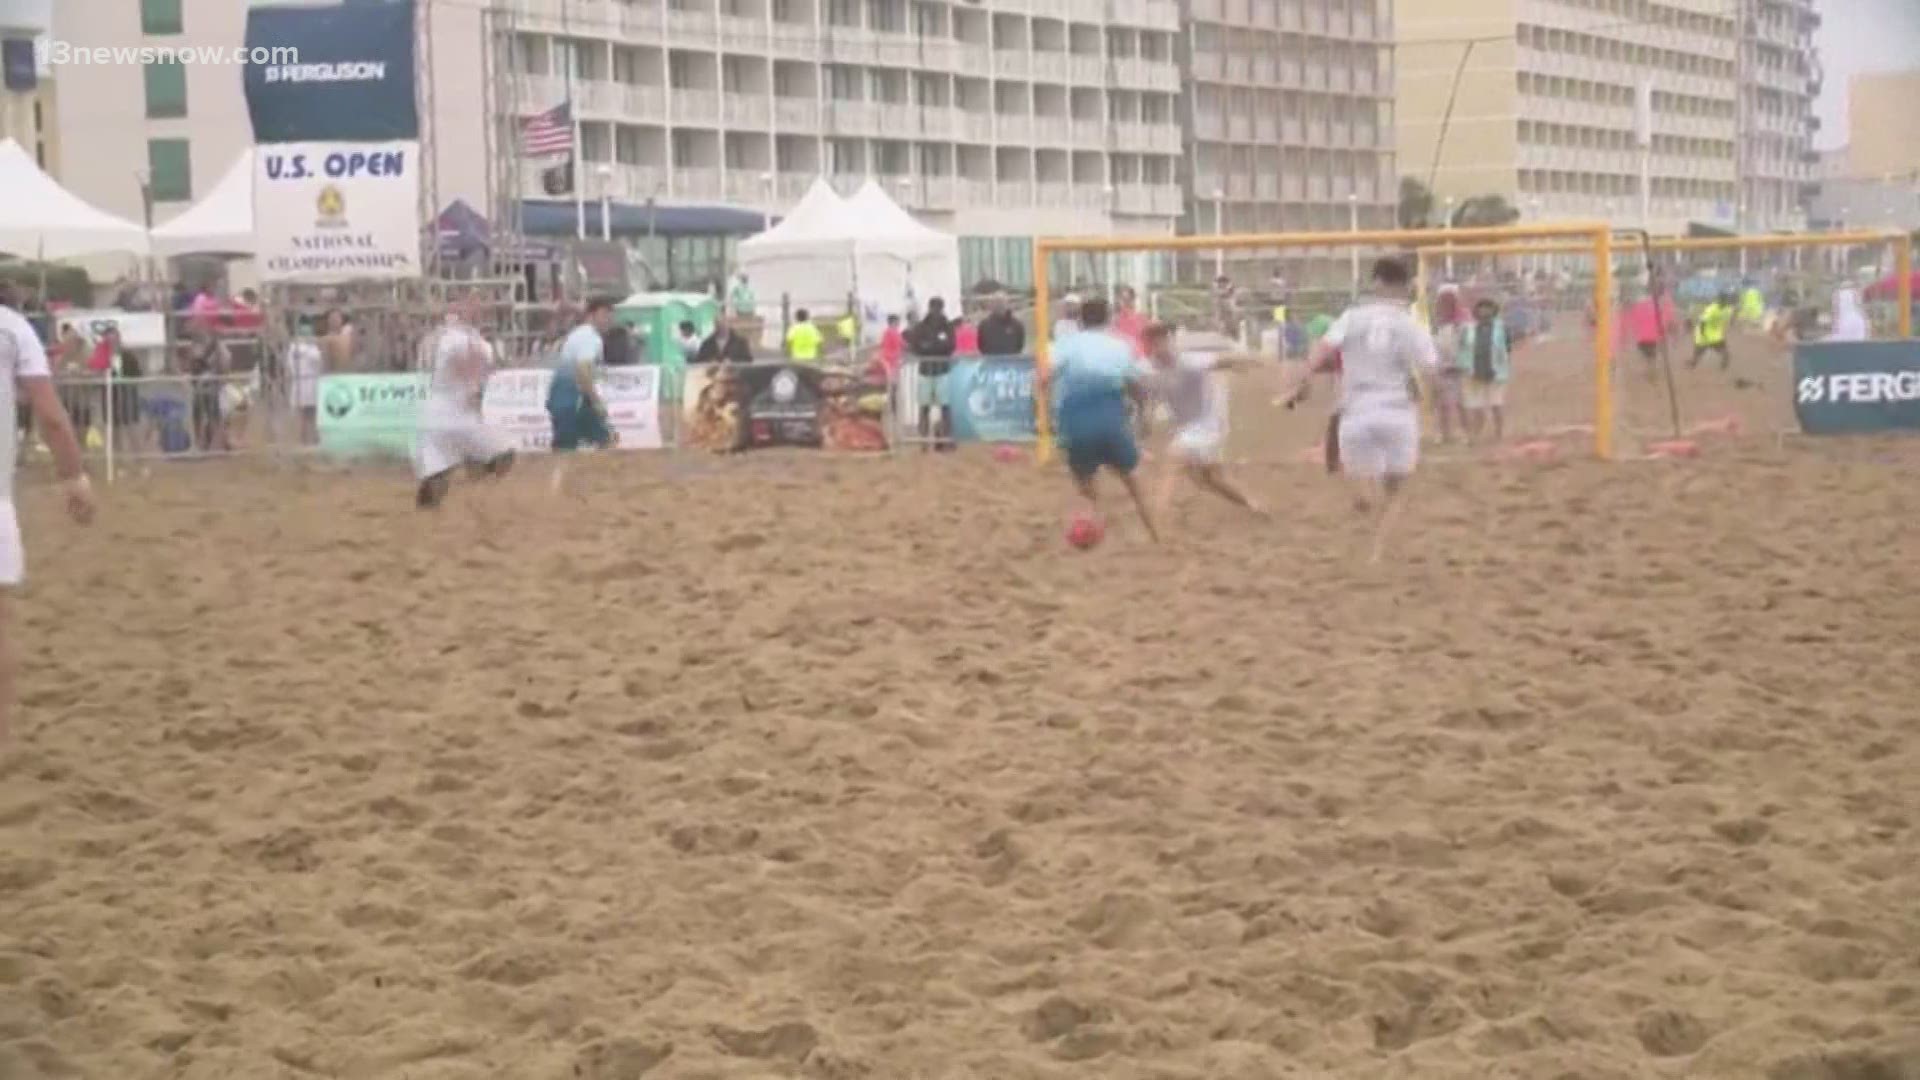 The North American Sand Soccer Championships brought 30,000 people a day to the Oceanfront over the weekend.